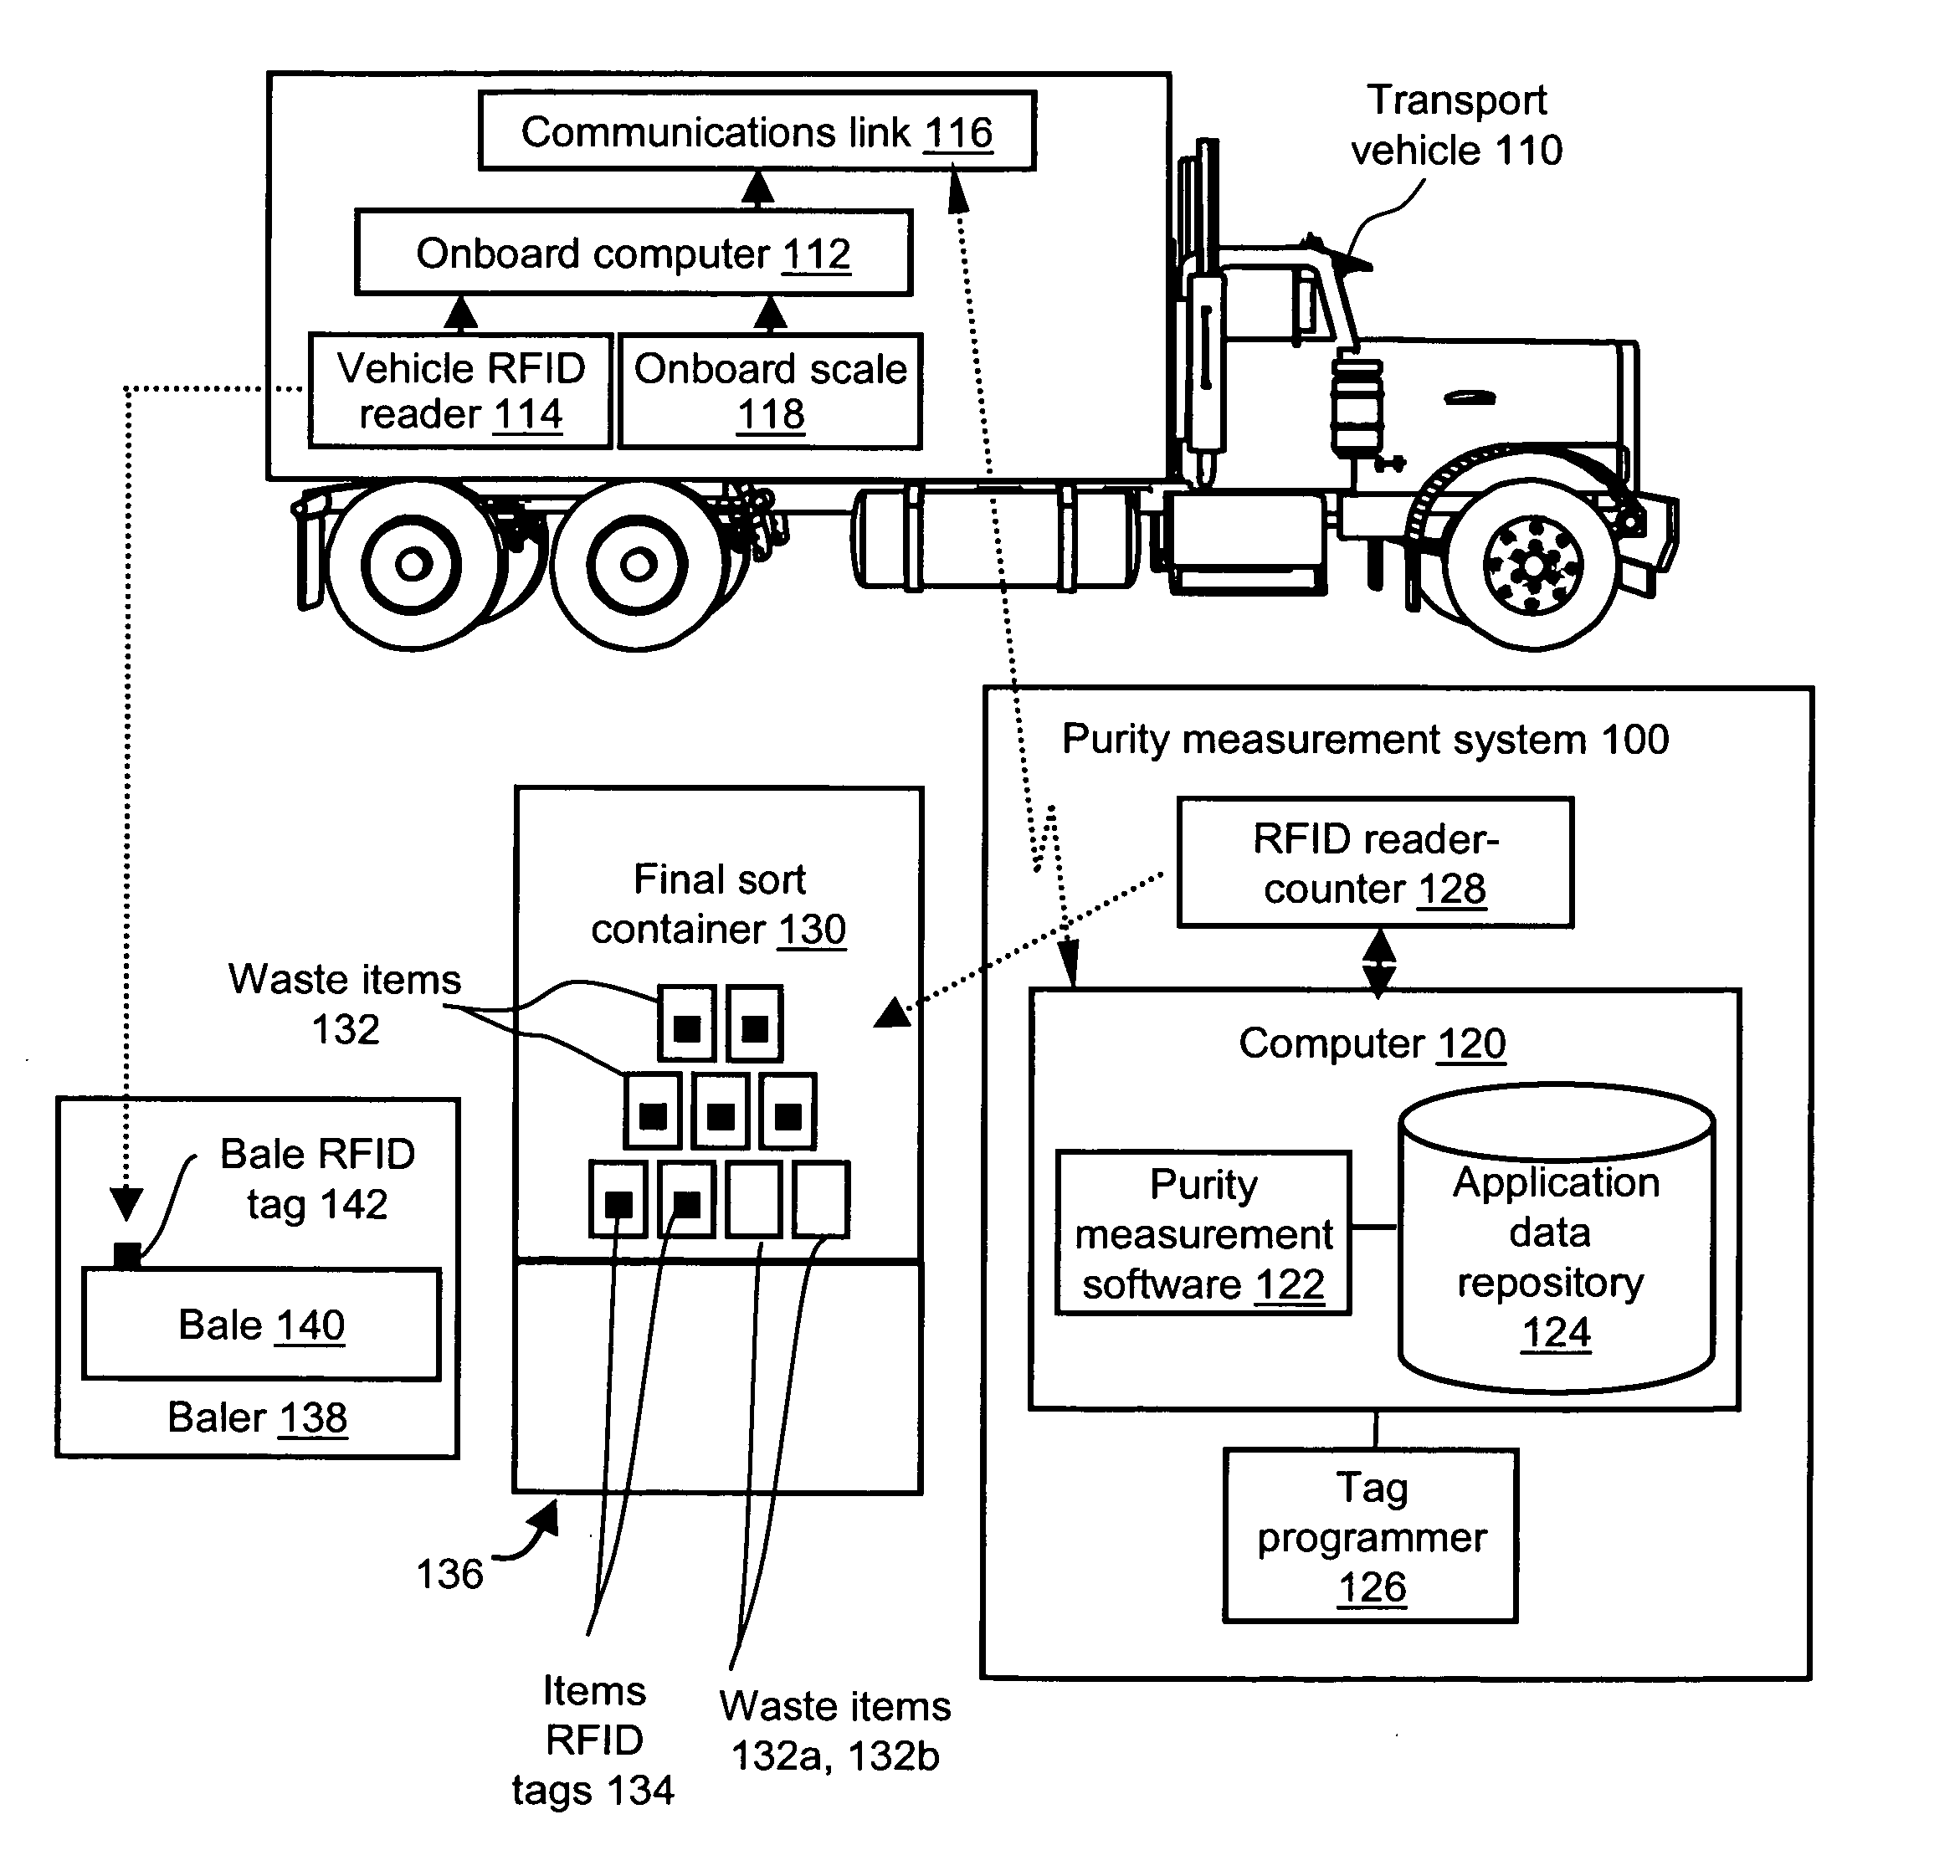 Systems and methods for measuring the purity of bales of recyclable materials